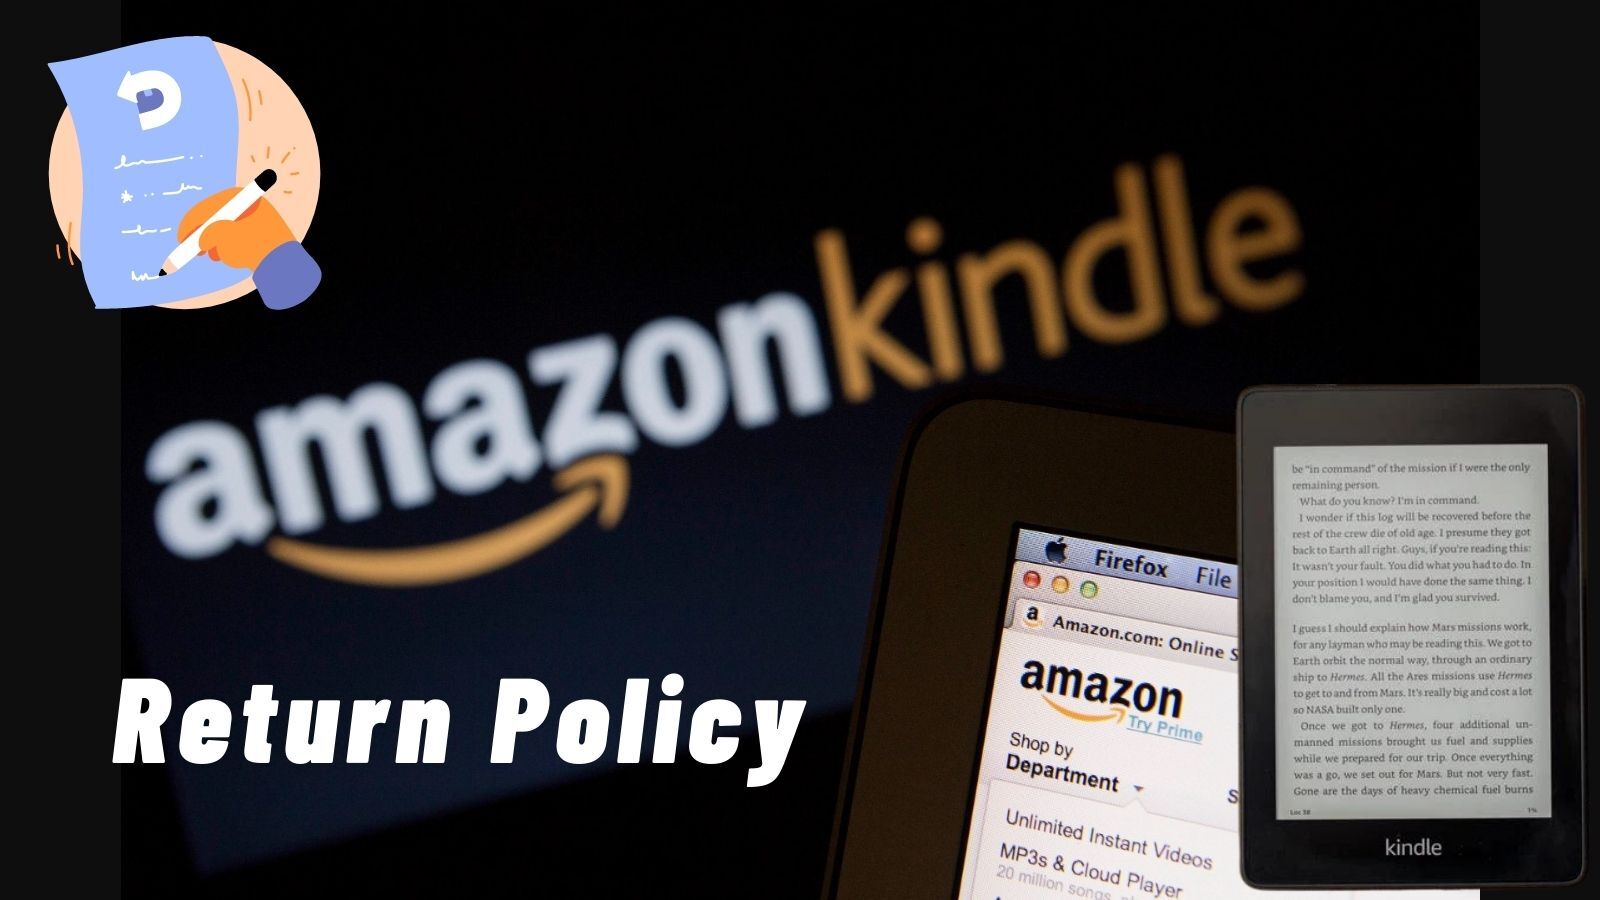 Amazon Kindle E-Book Return Policy (All You Need to Know!)